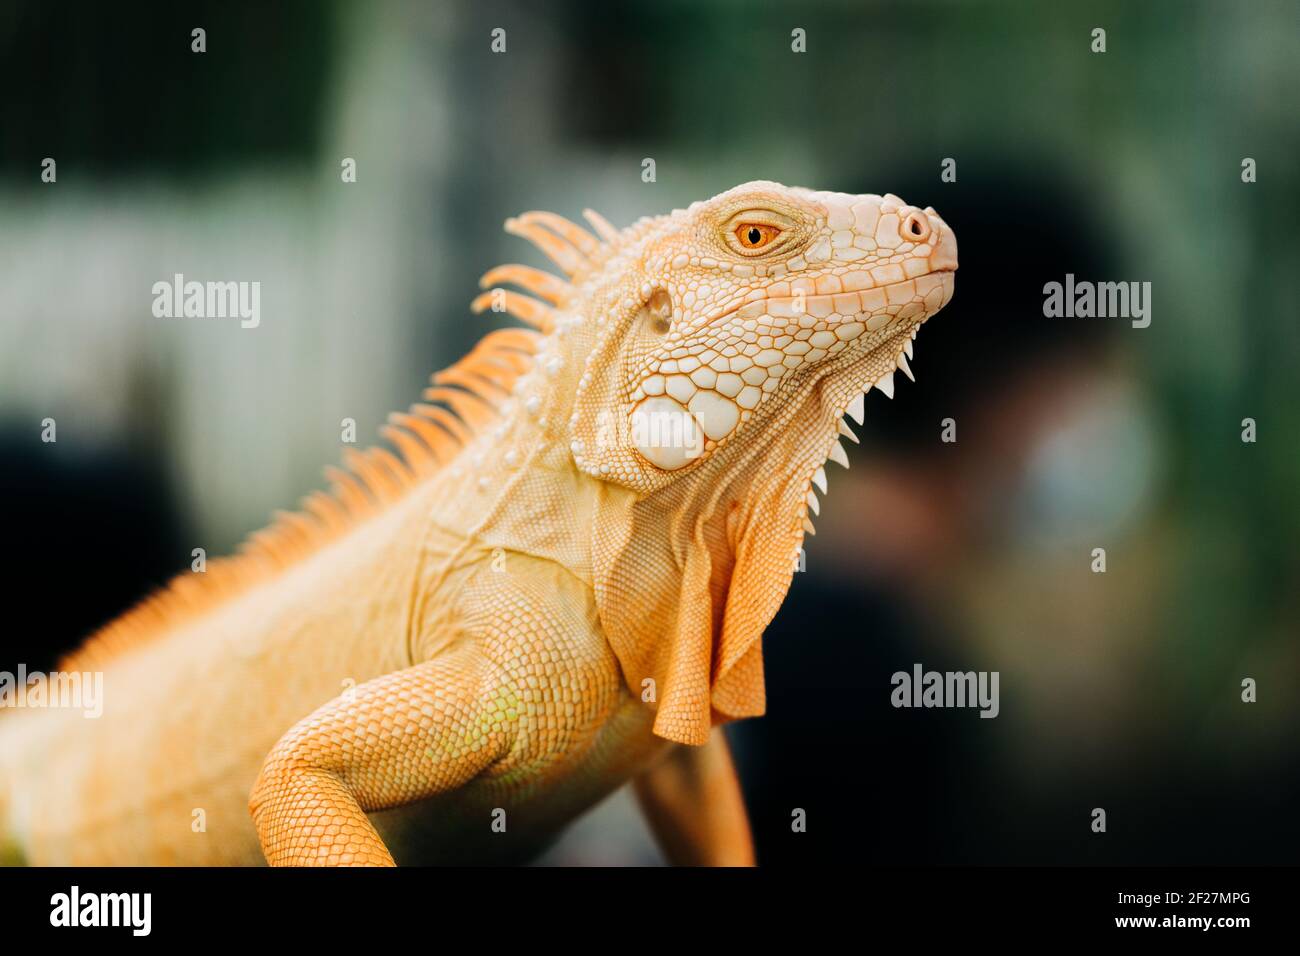 A yellow iguana settles in its place during the reptile exhibition. Stock Photo